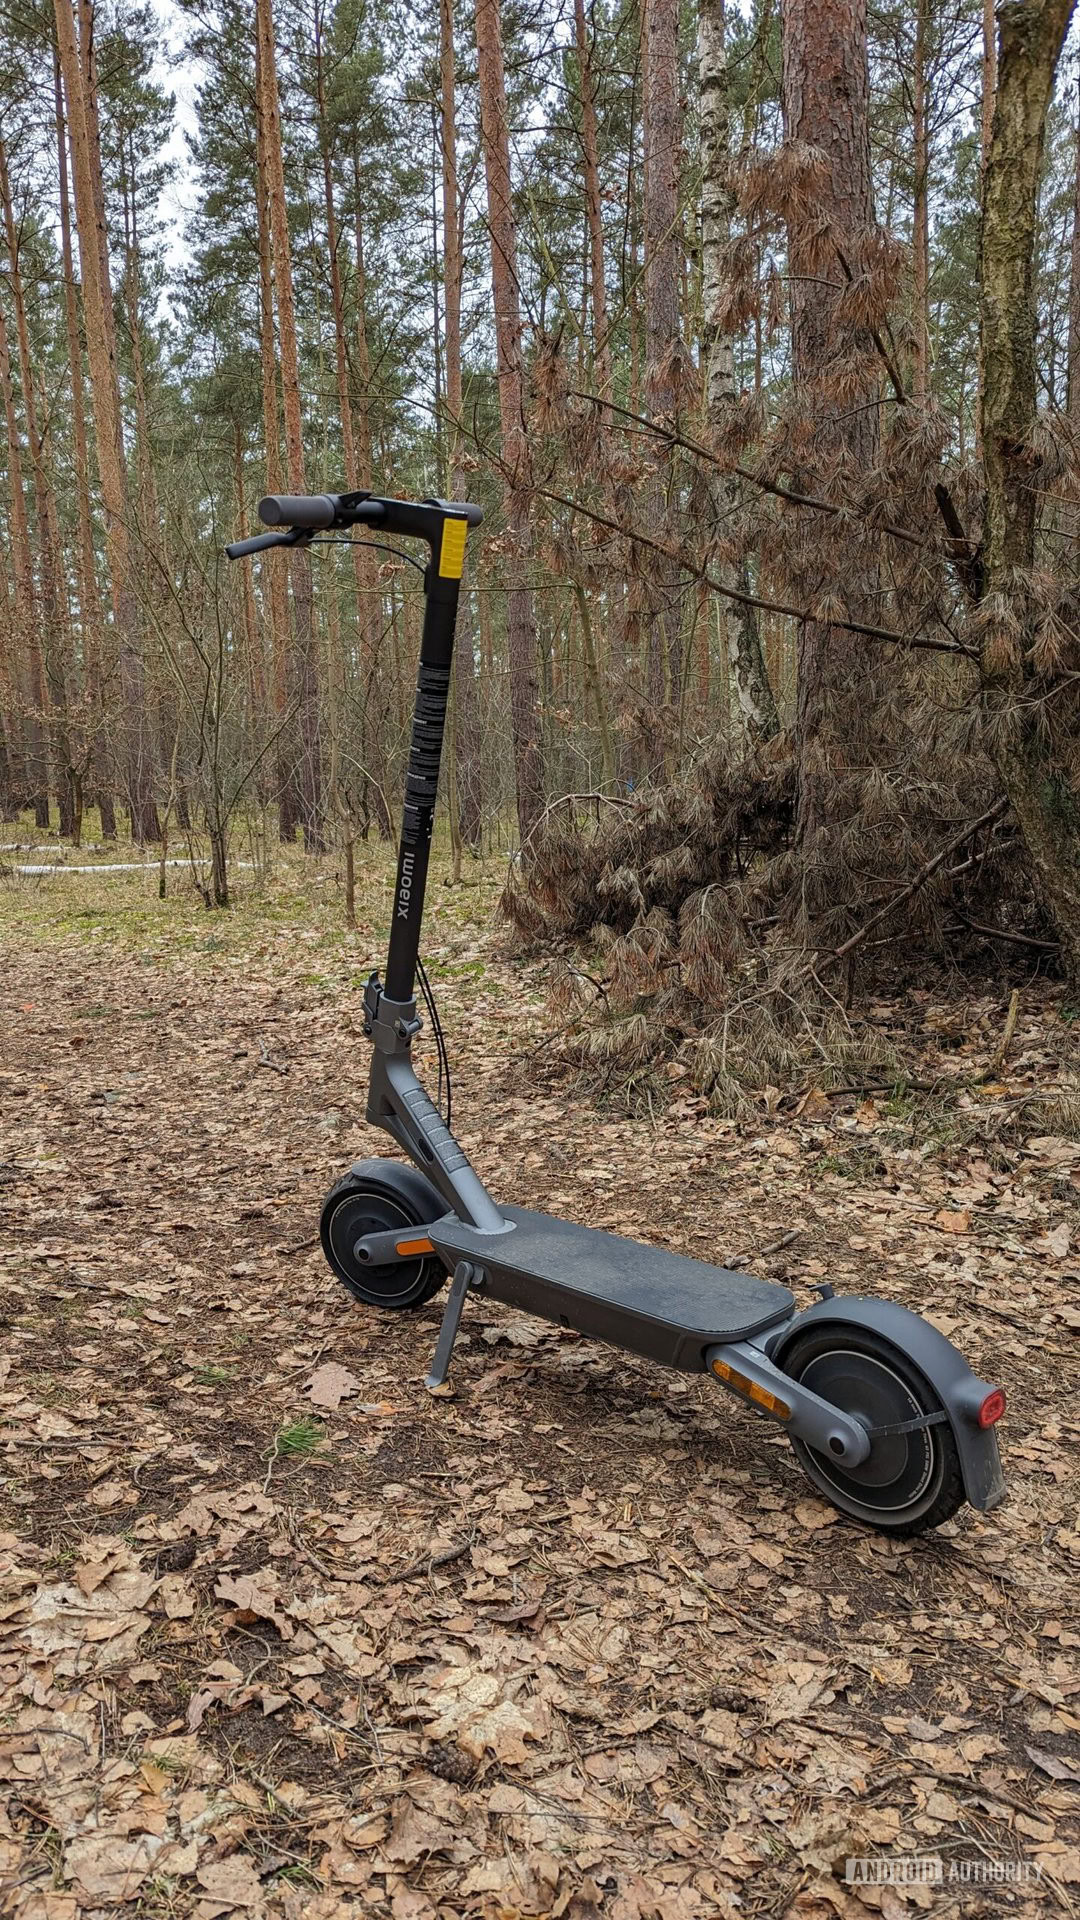 Xiaomi Electric Scooter 4 Ultra performance test